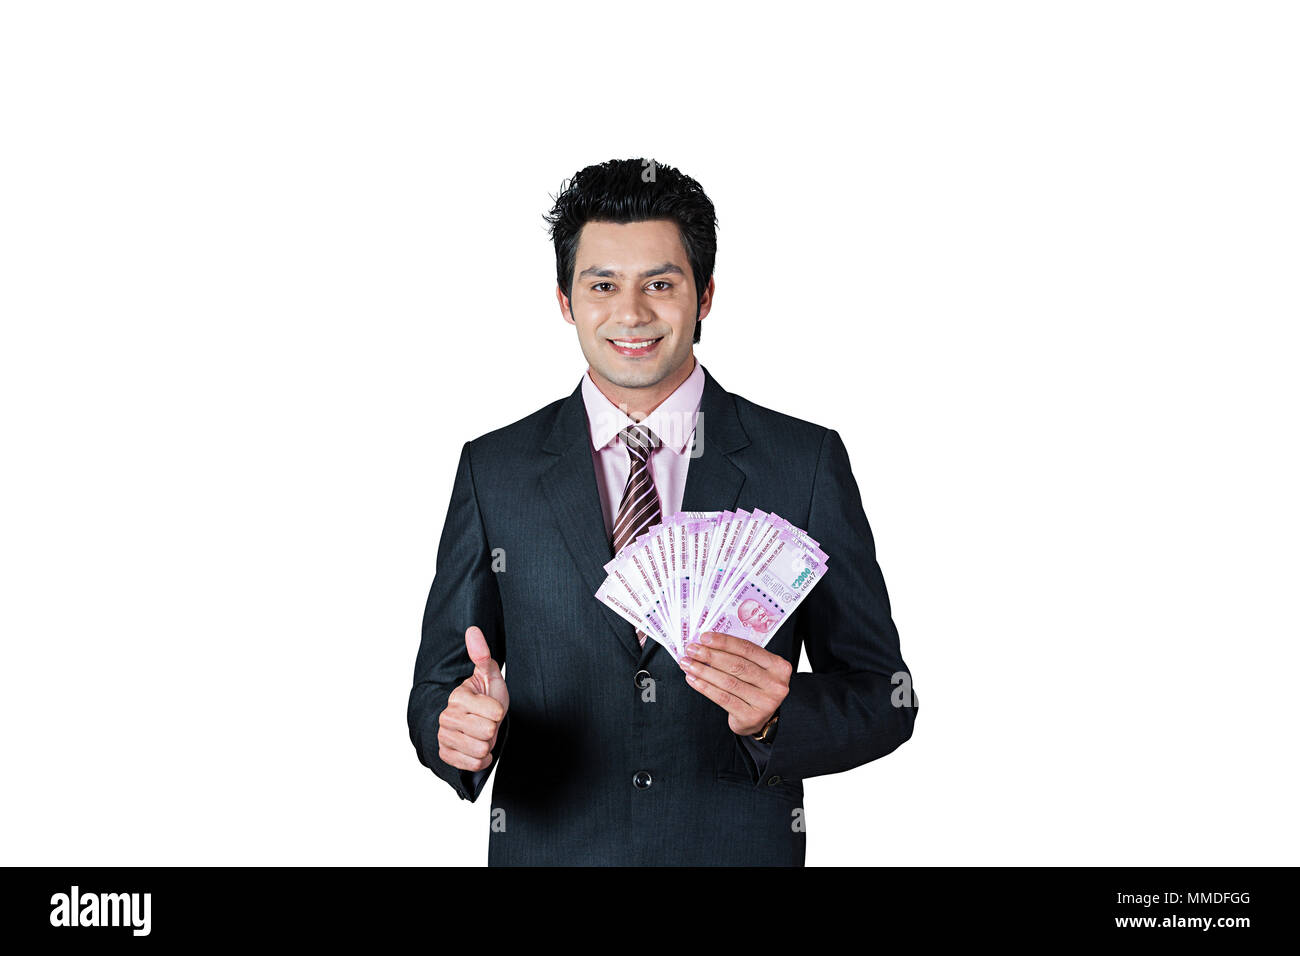 One Businessman Showing Thumbs-up With Indian Currency Two-Thousand rupee Banknotes Stock Photo